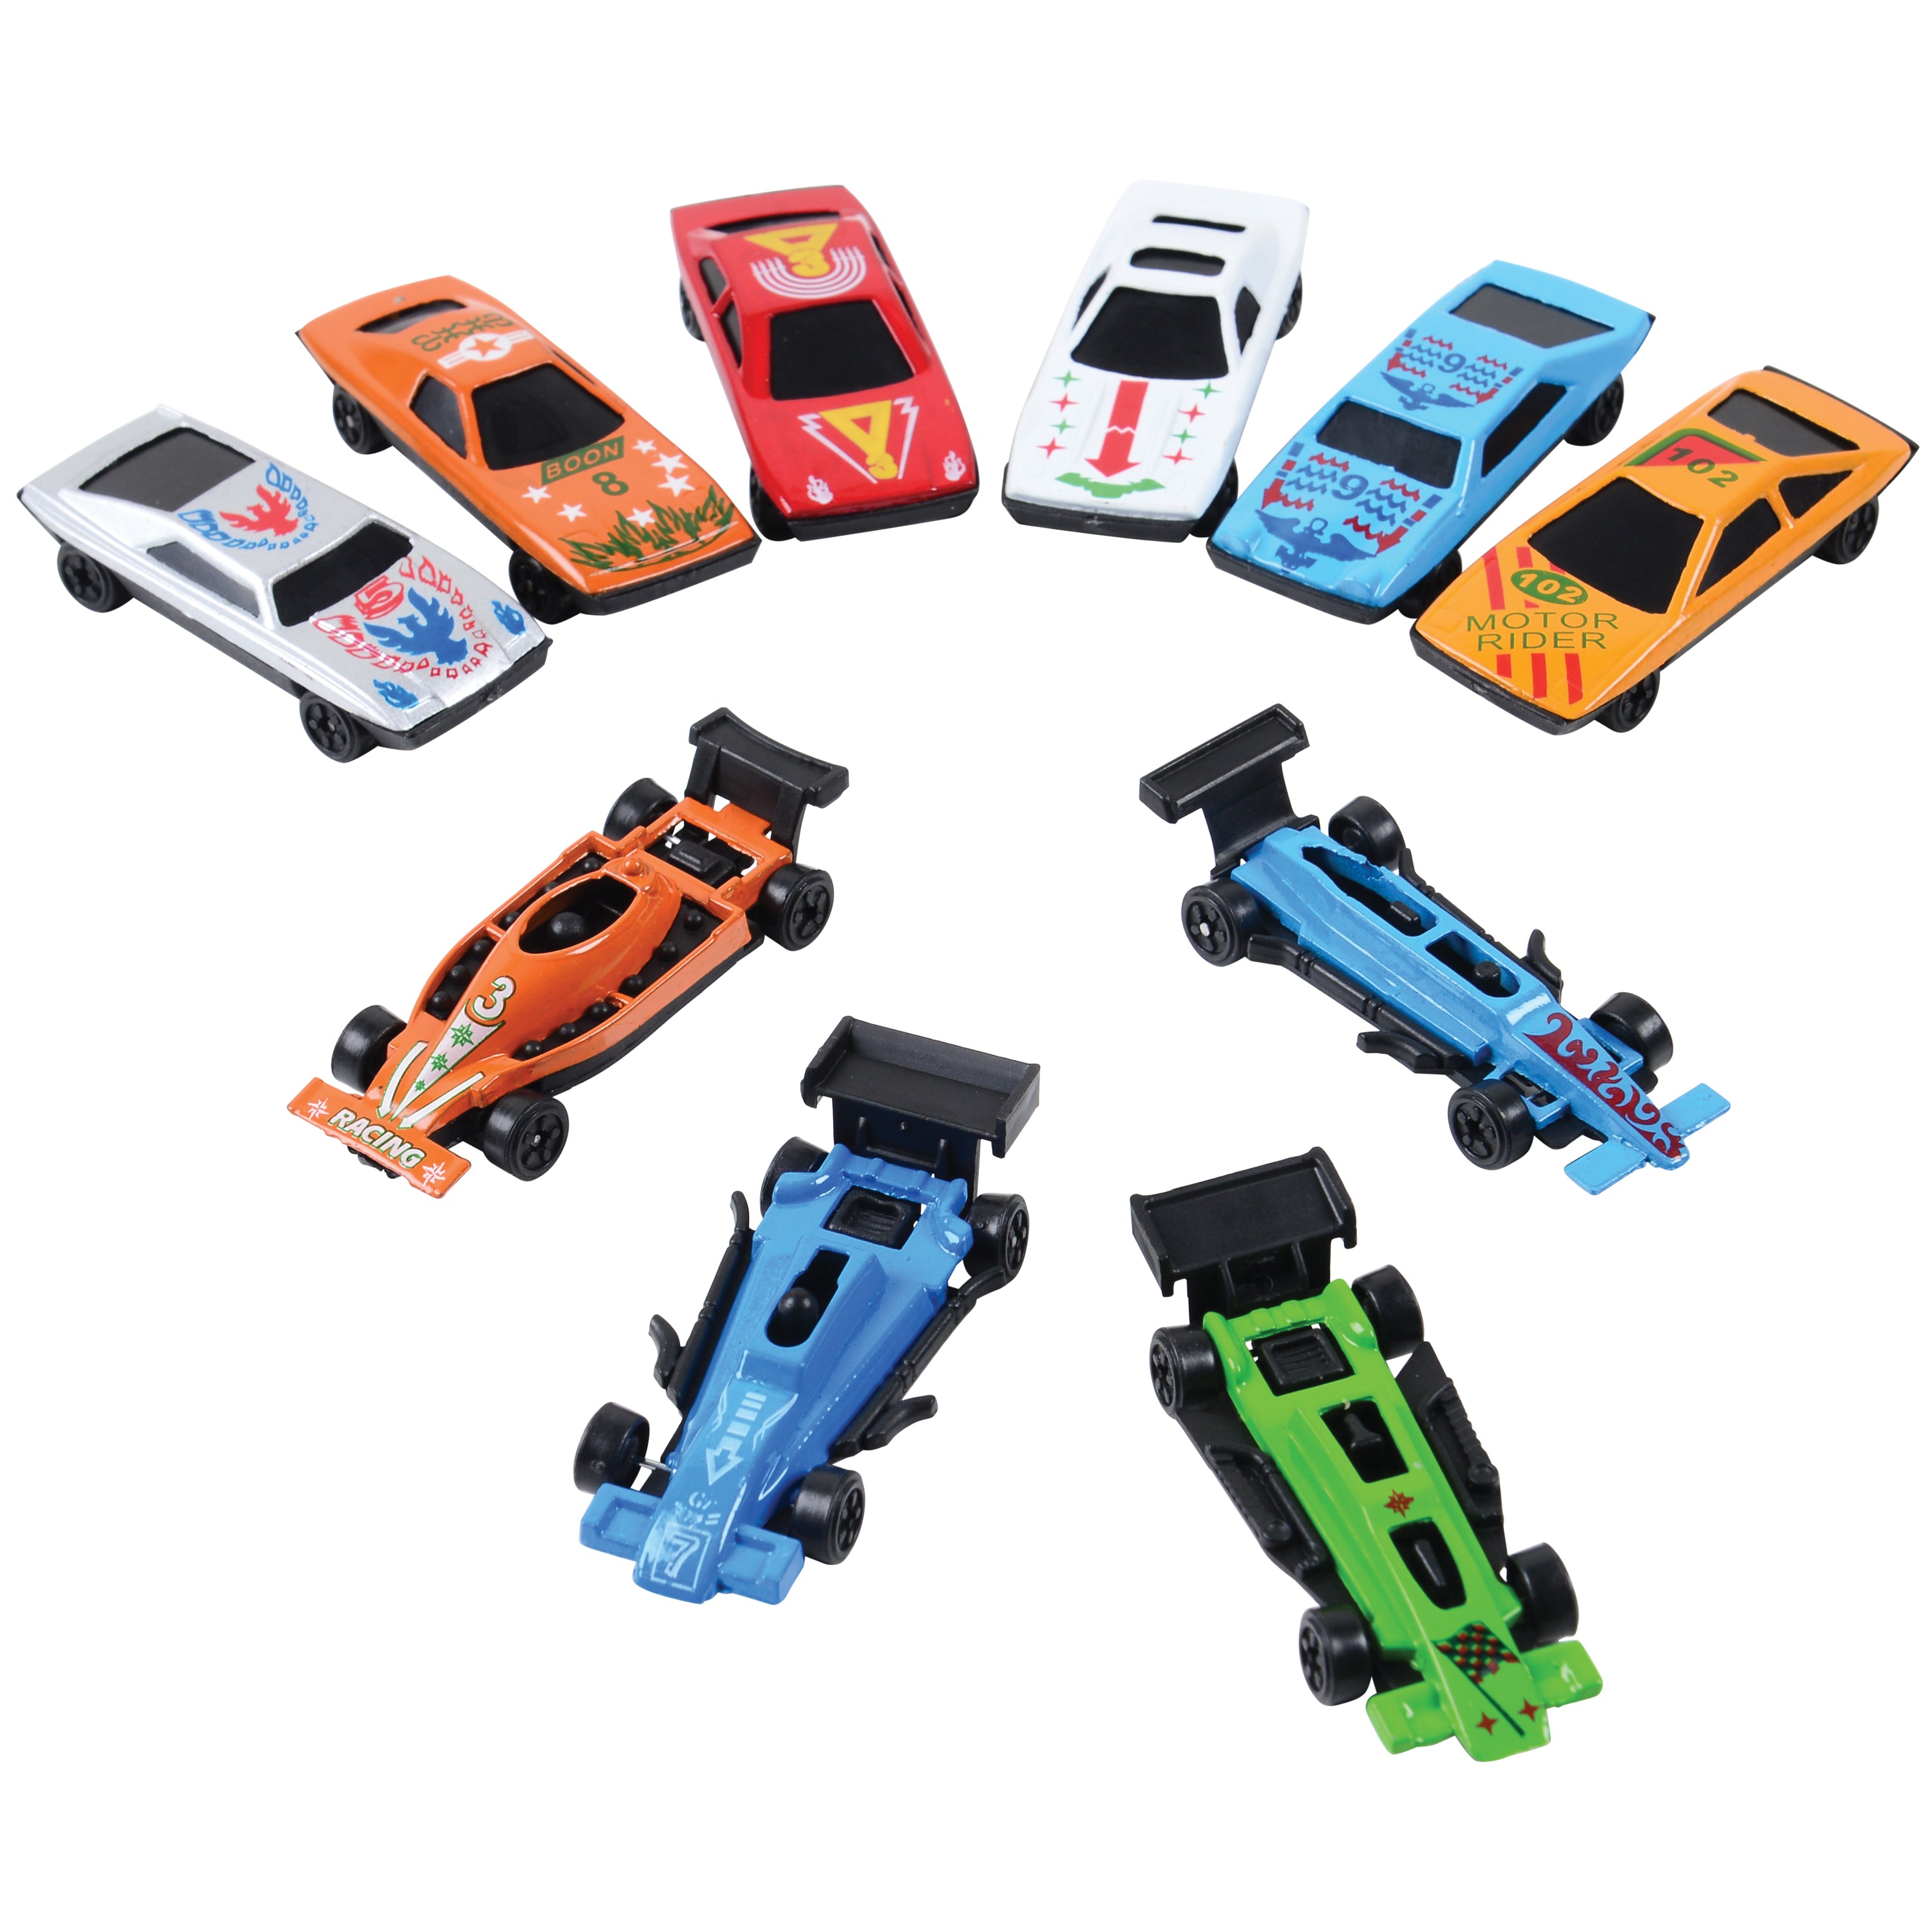 Car Set Toy (One Set) - Only $3.42 at Carnival Source